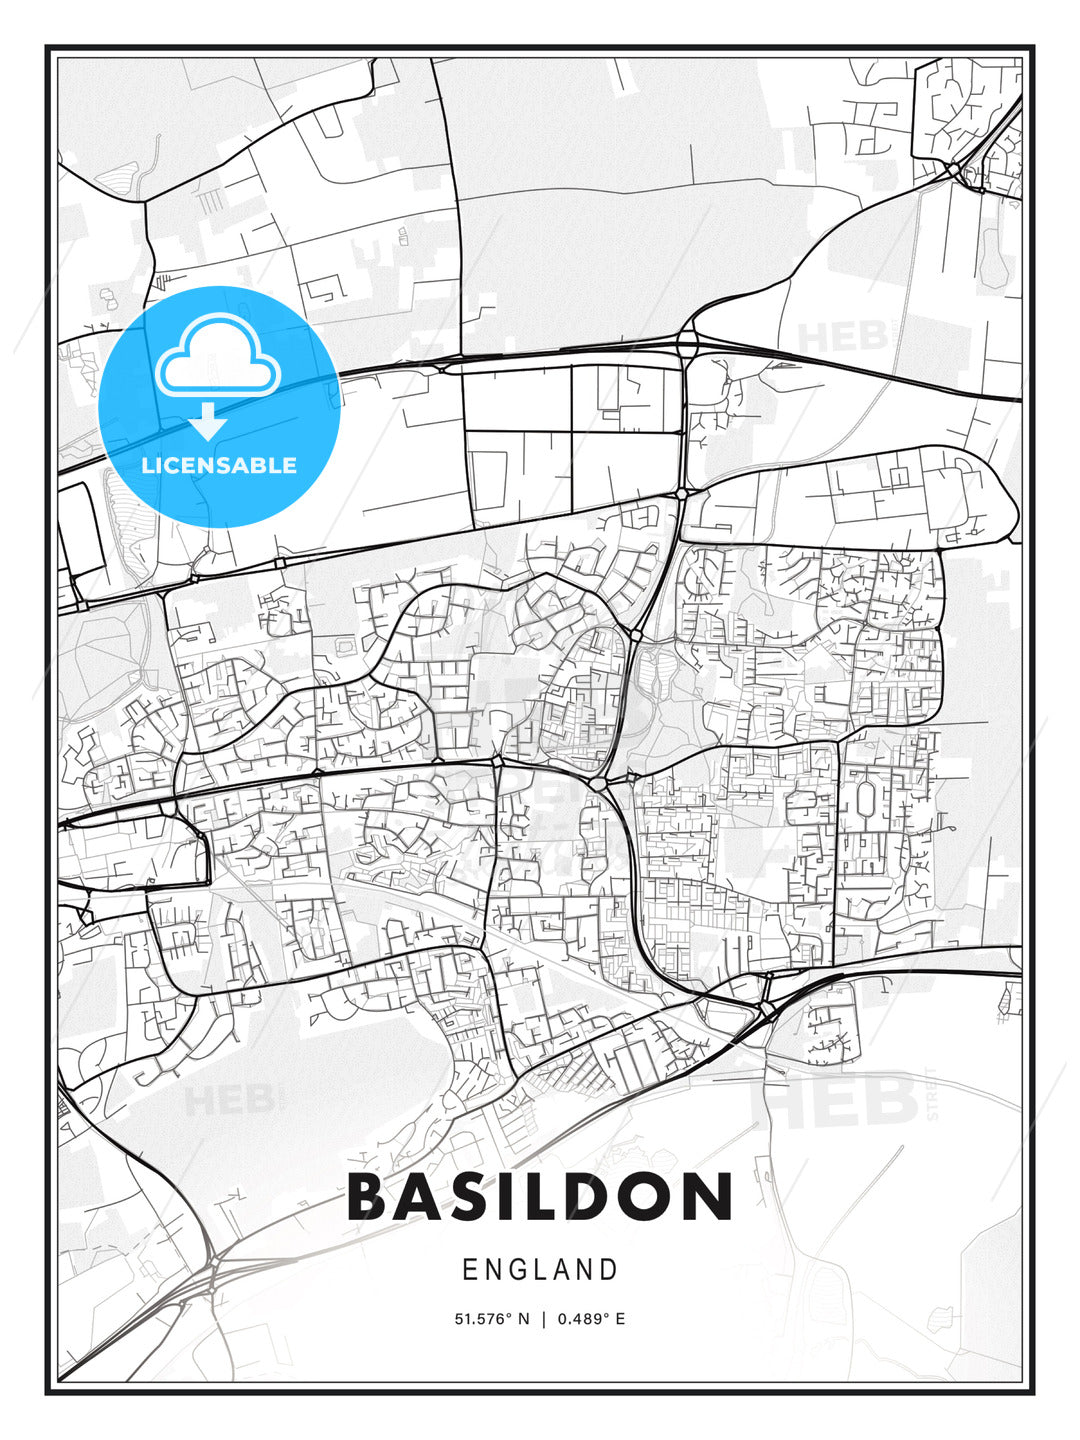 Basildon, England, Modern Print Template in Various Formats - HEBSTREITS Sketches